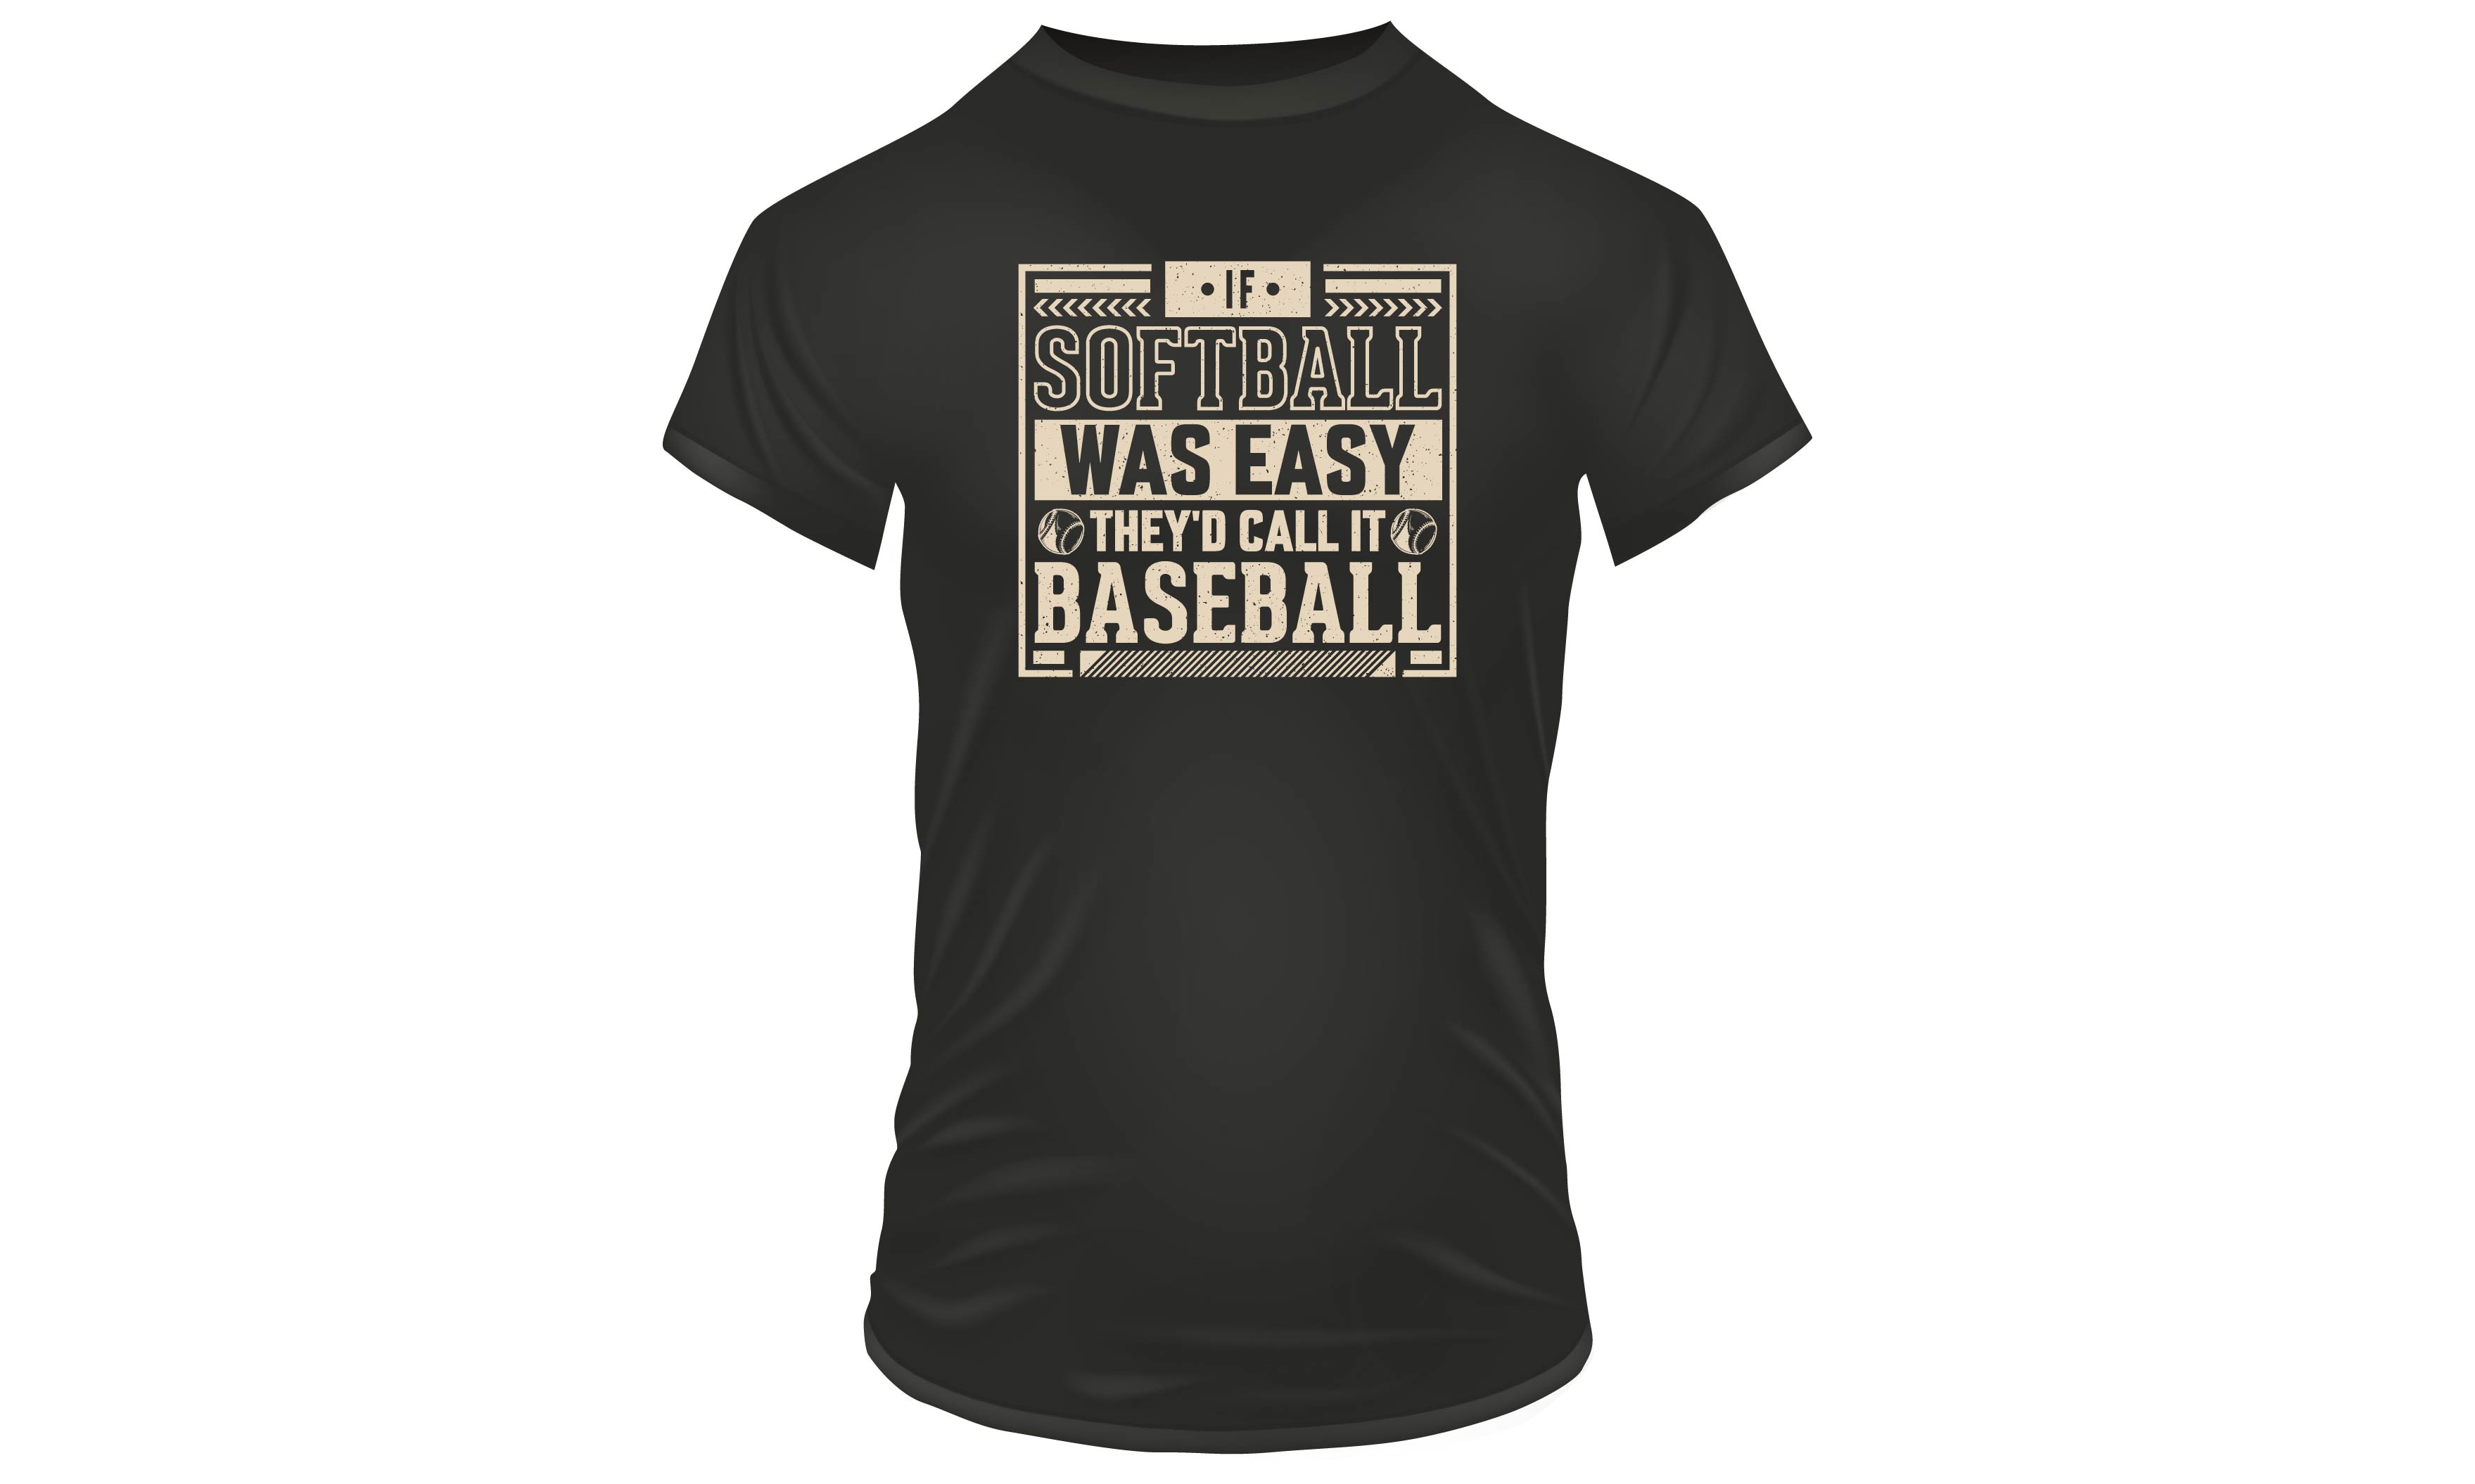 Black t - shirt that says softball was easy and they call it baseball.